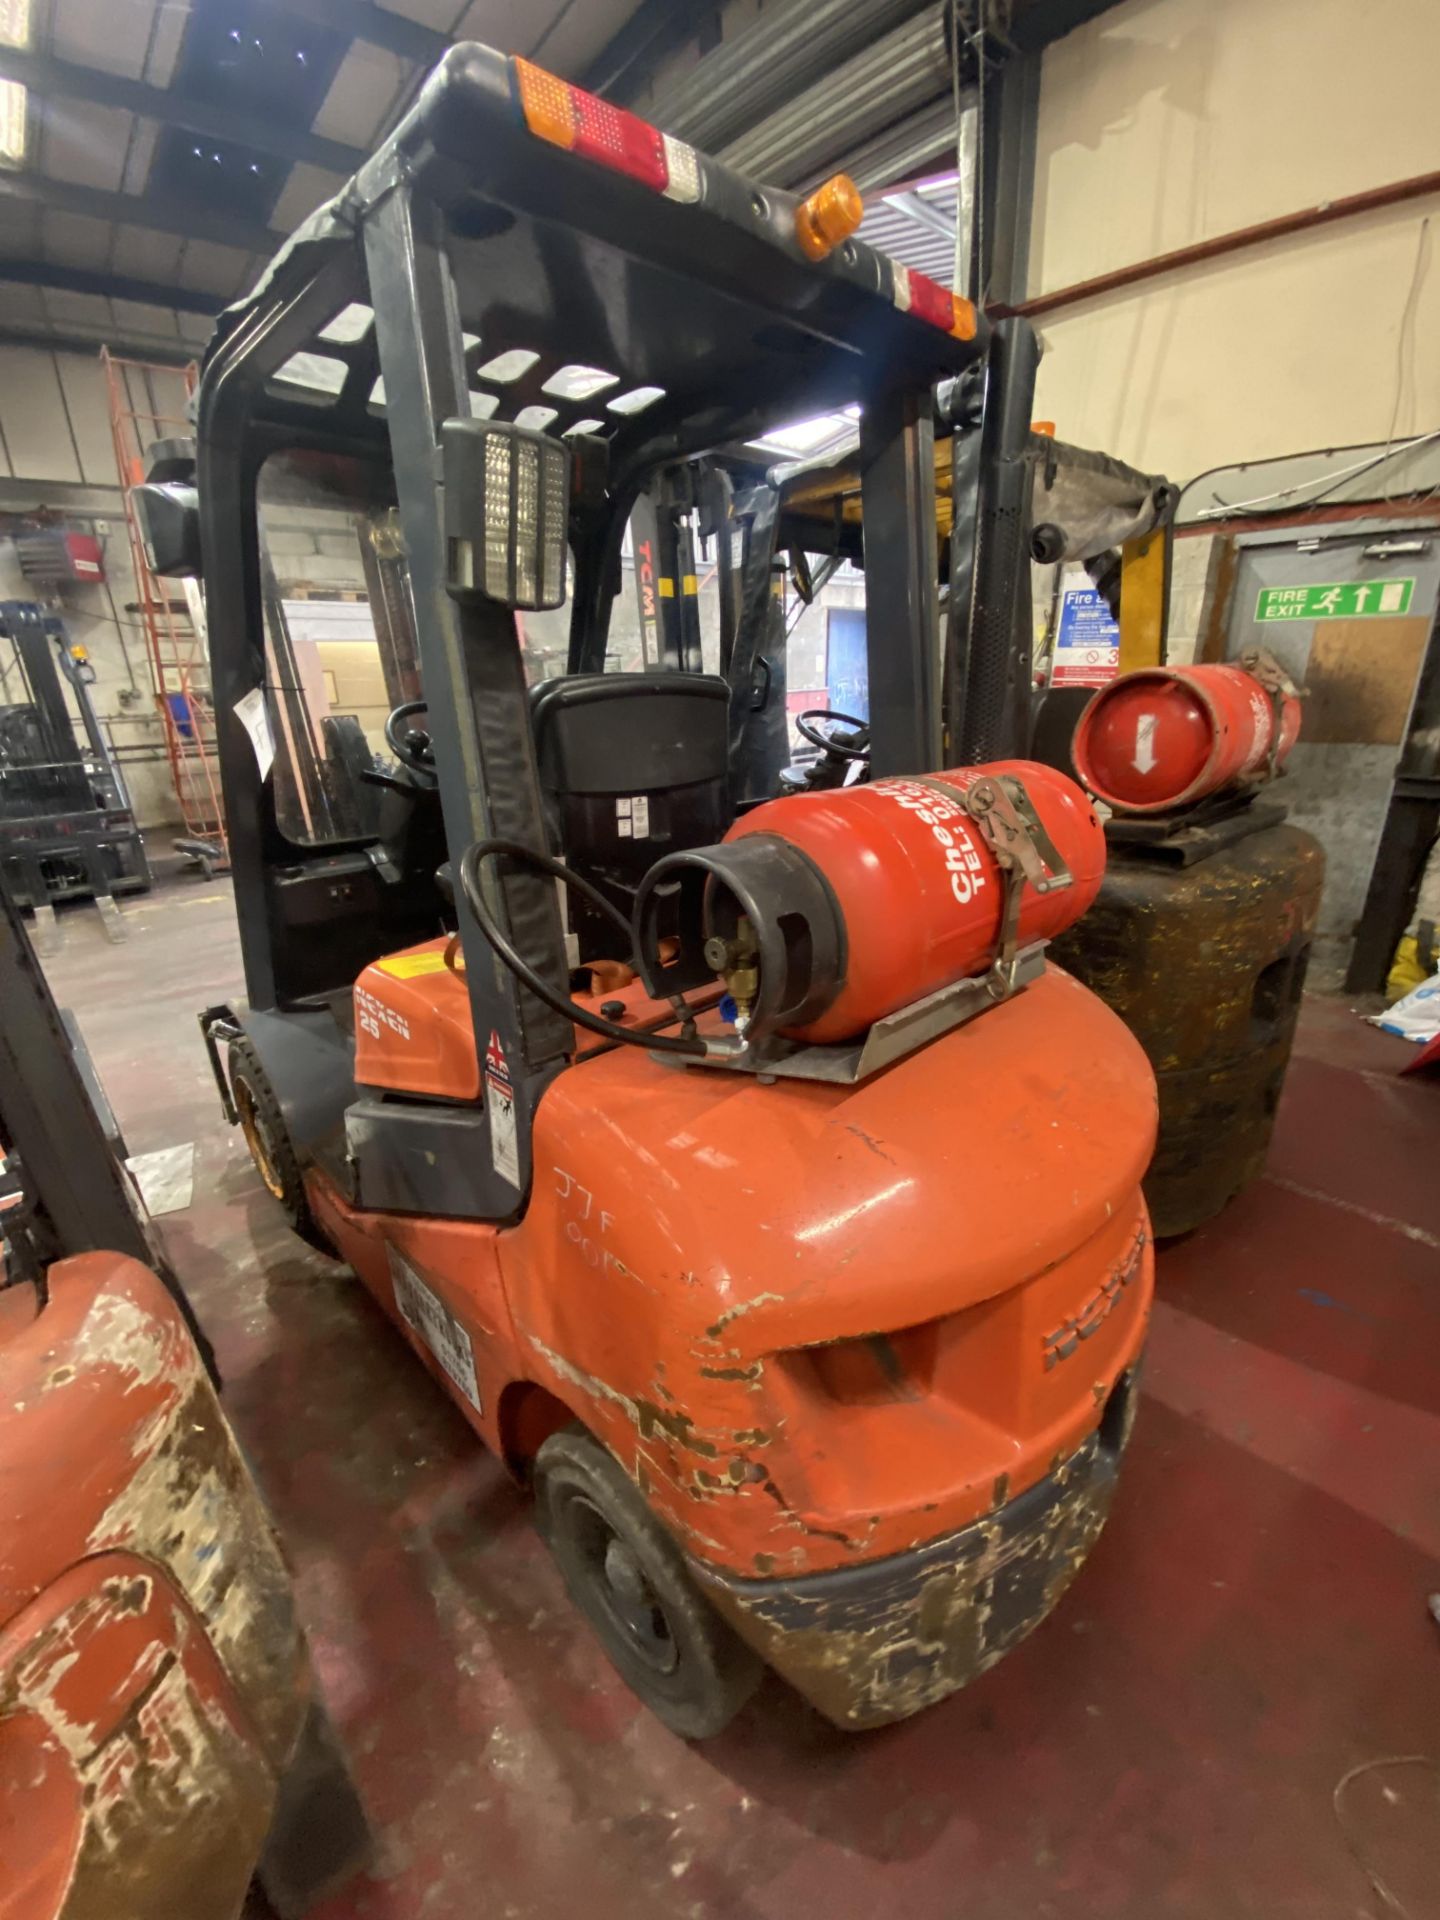 Nexen FGX25 2300kg cap. LPG Fork Lift Truck, serial no. X2E1826F, indicated hours unknown, with - Image 5 of 9